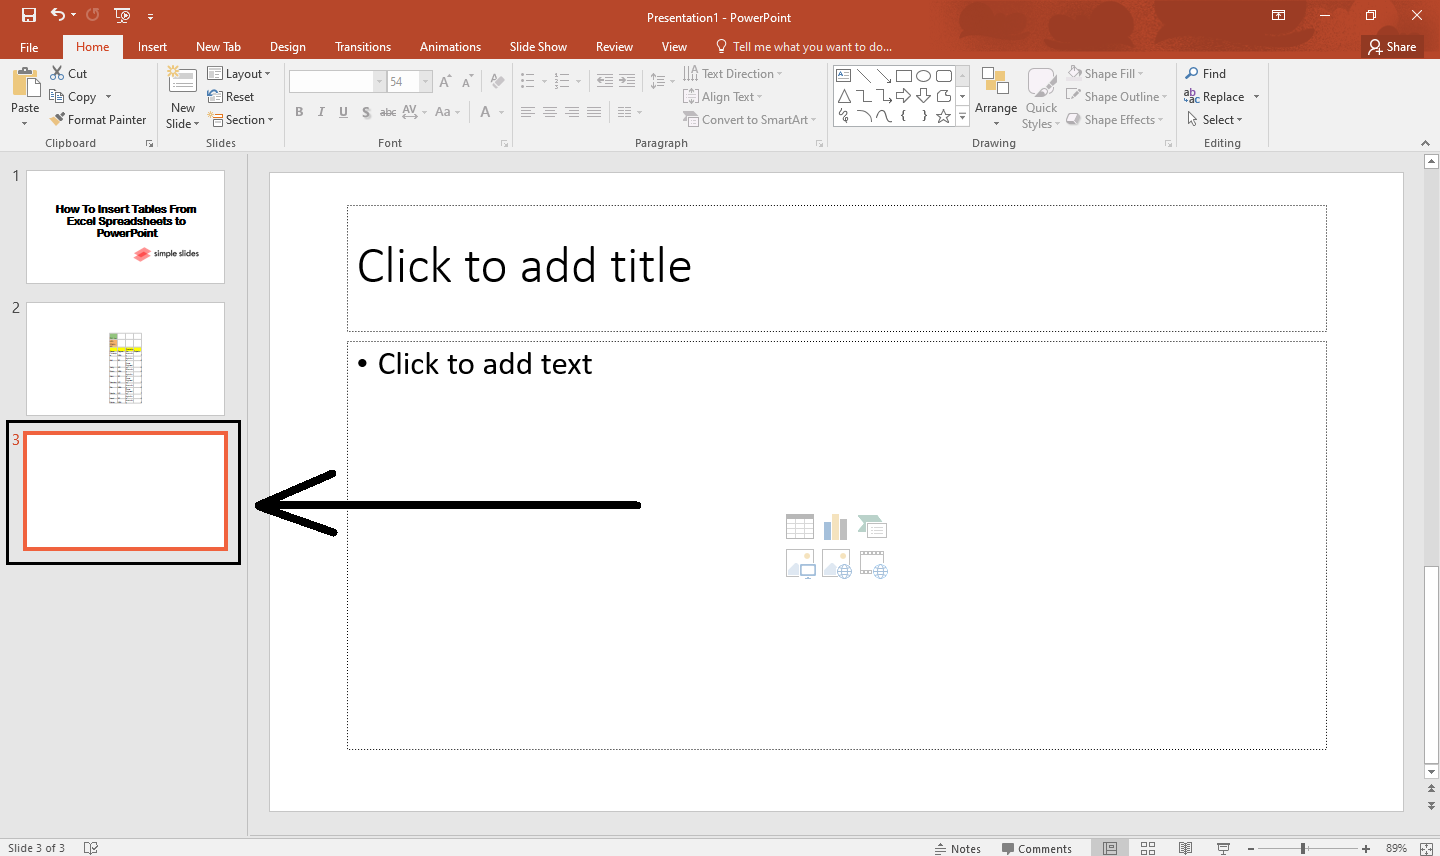 Go to your presentation, and click an existing slide where you wish to inset the Excel worksheet.